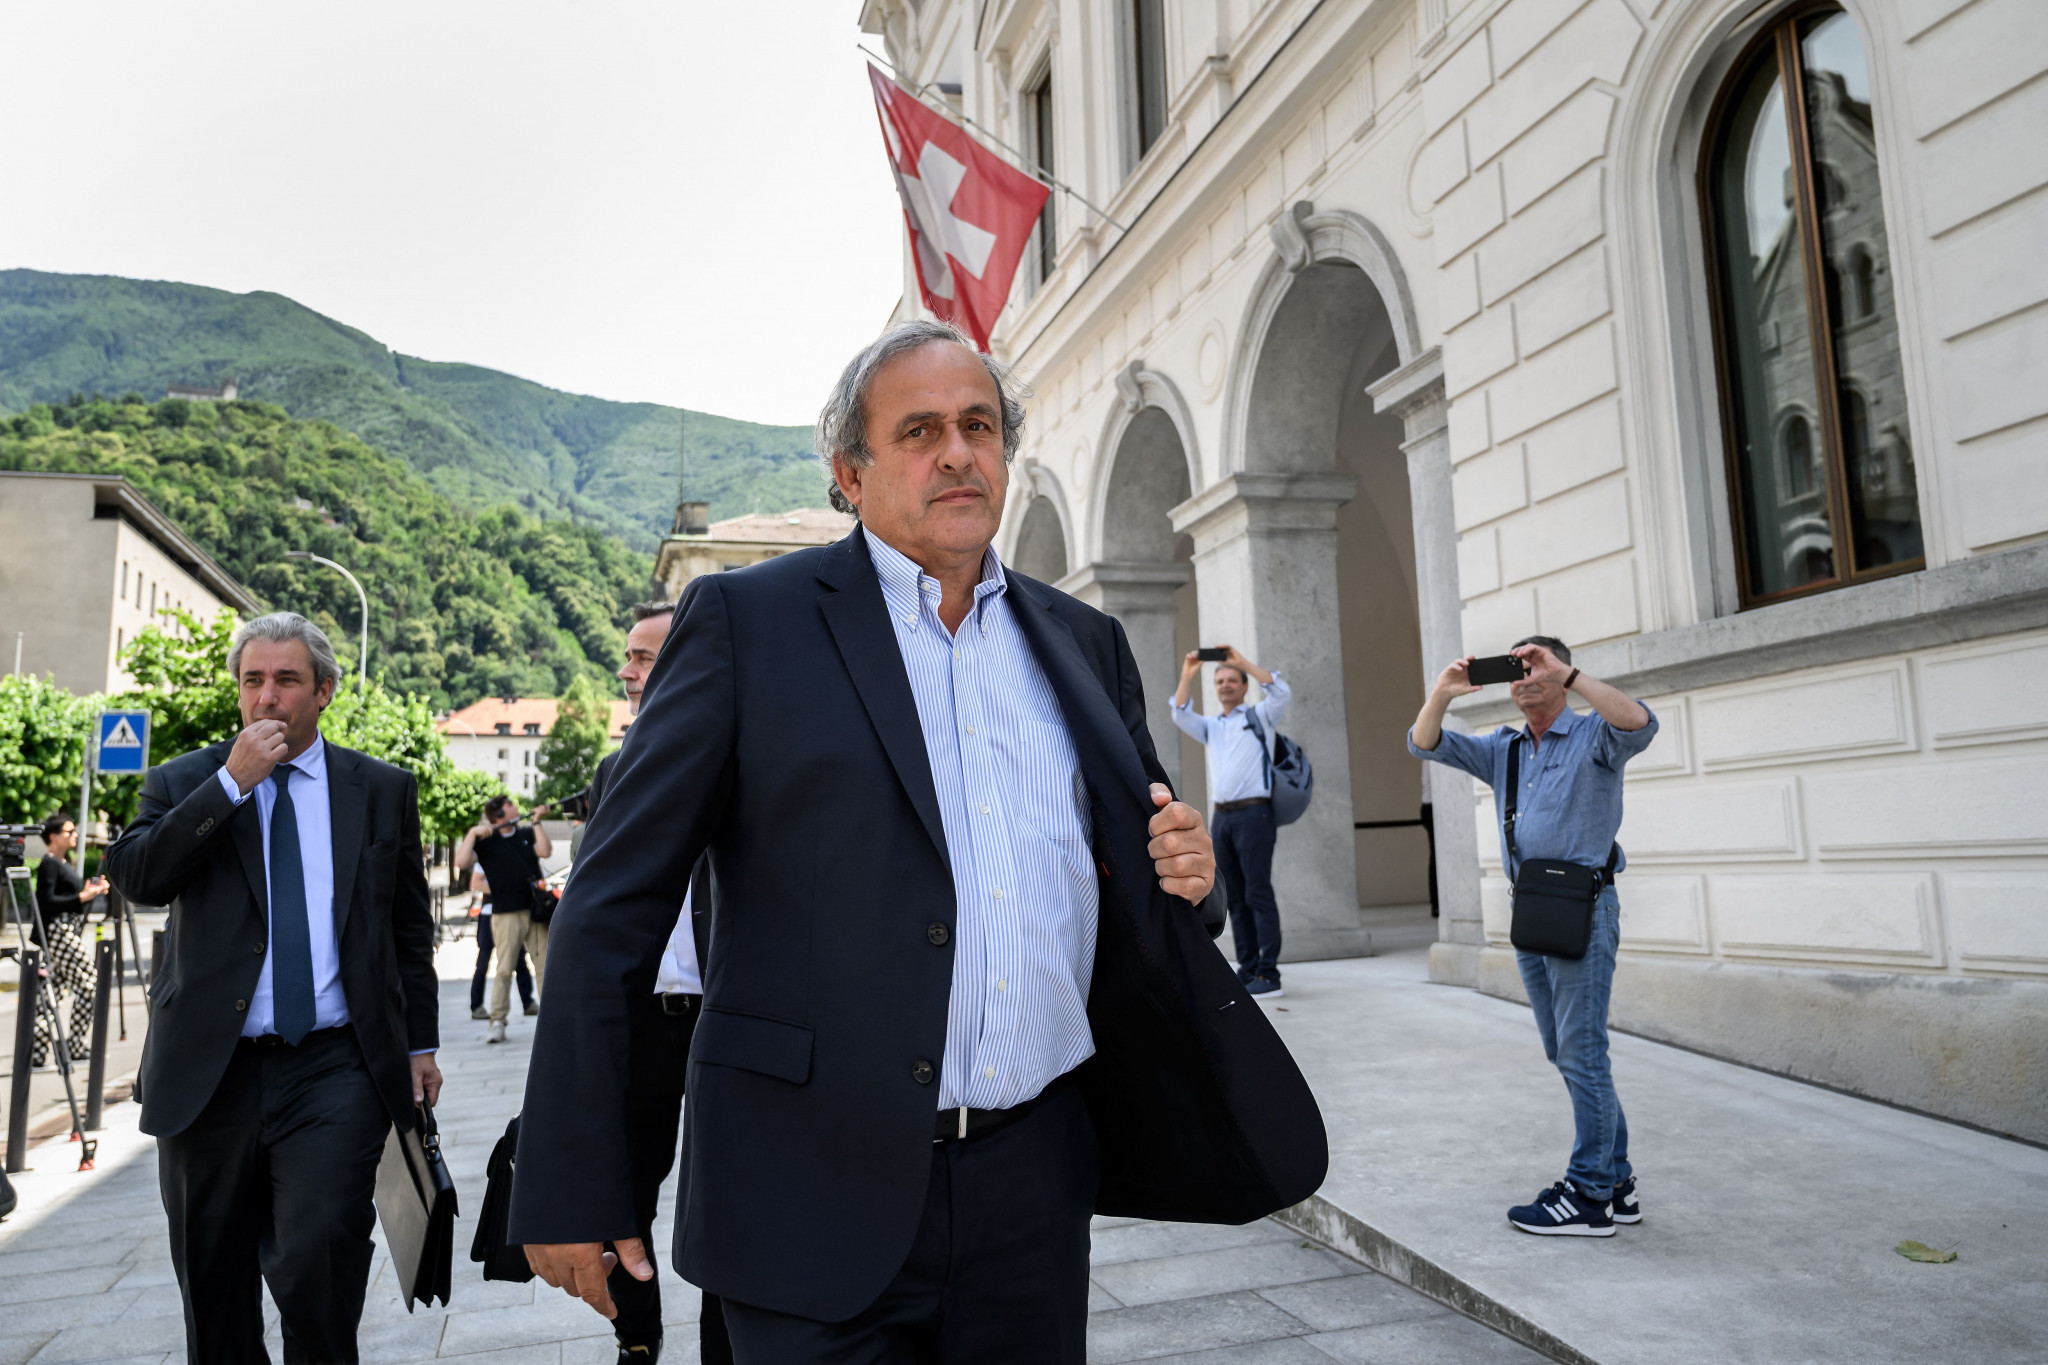 Platini claims he is battling "injustice" prior to fraud trial verdict